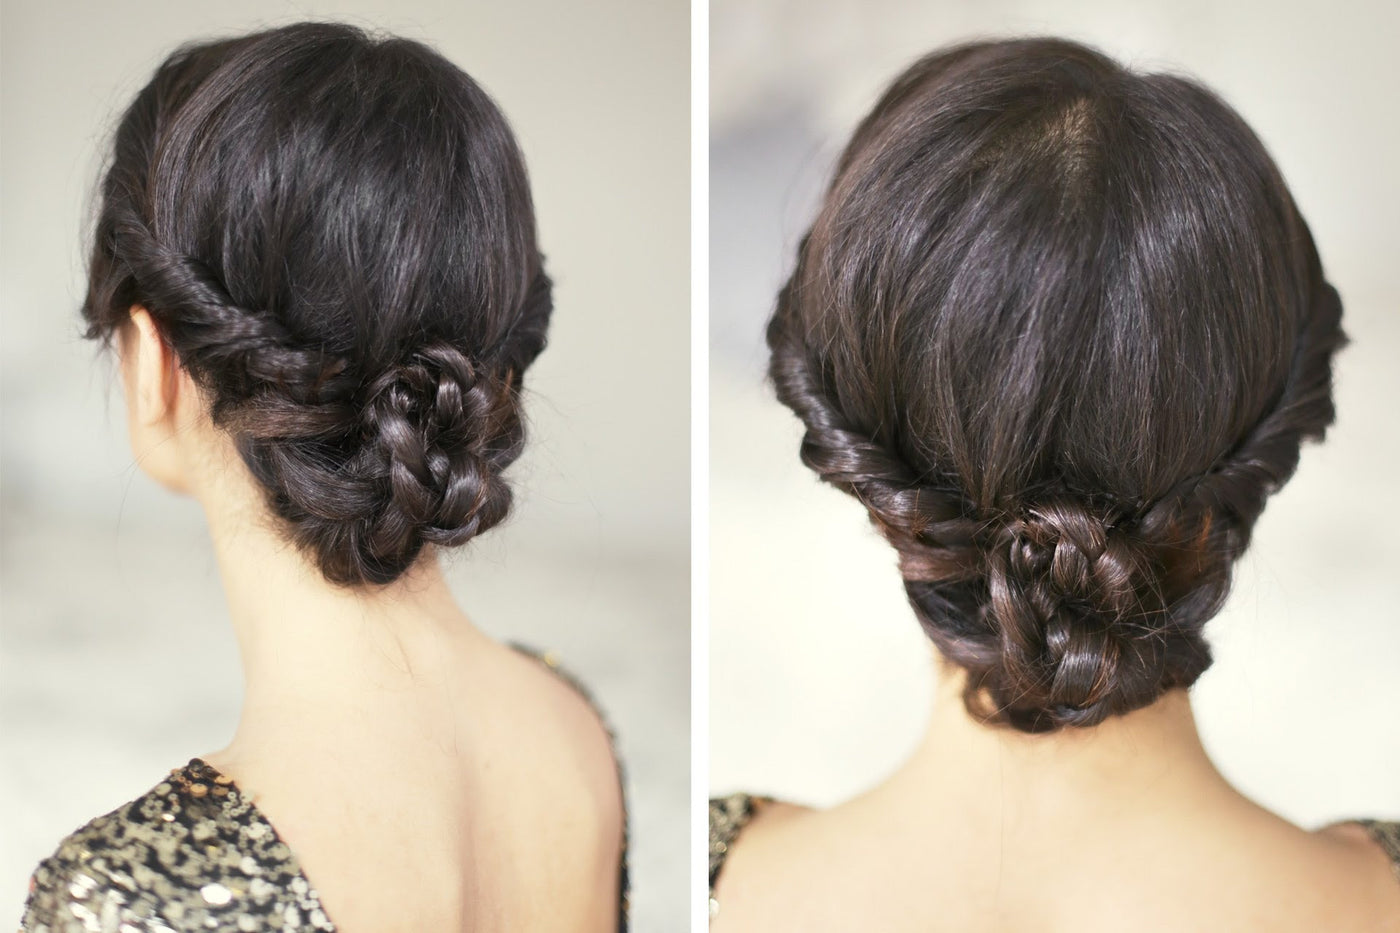 11 gorgeous party hairstyles you'll want to try for Christmas